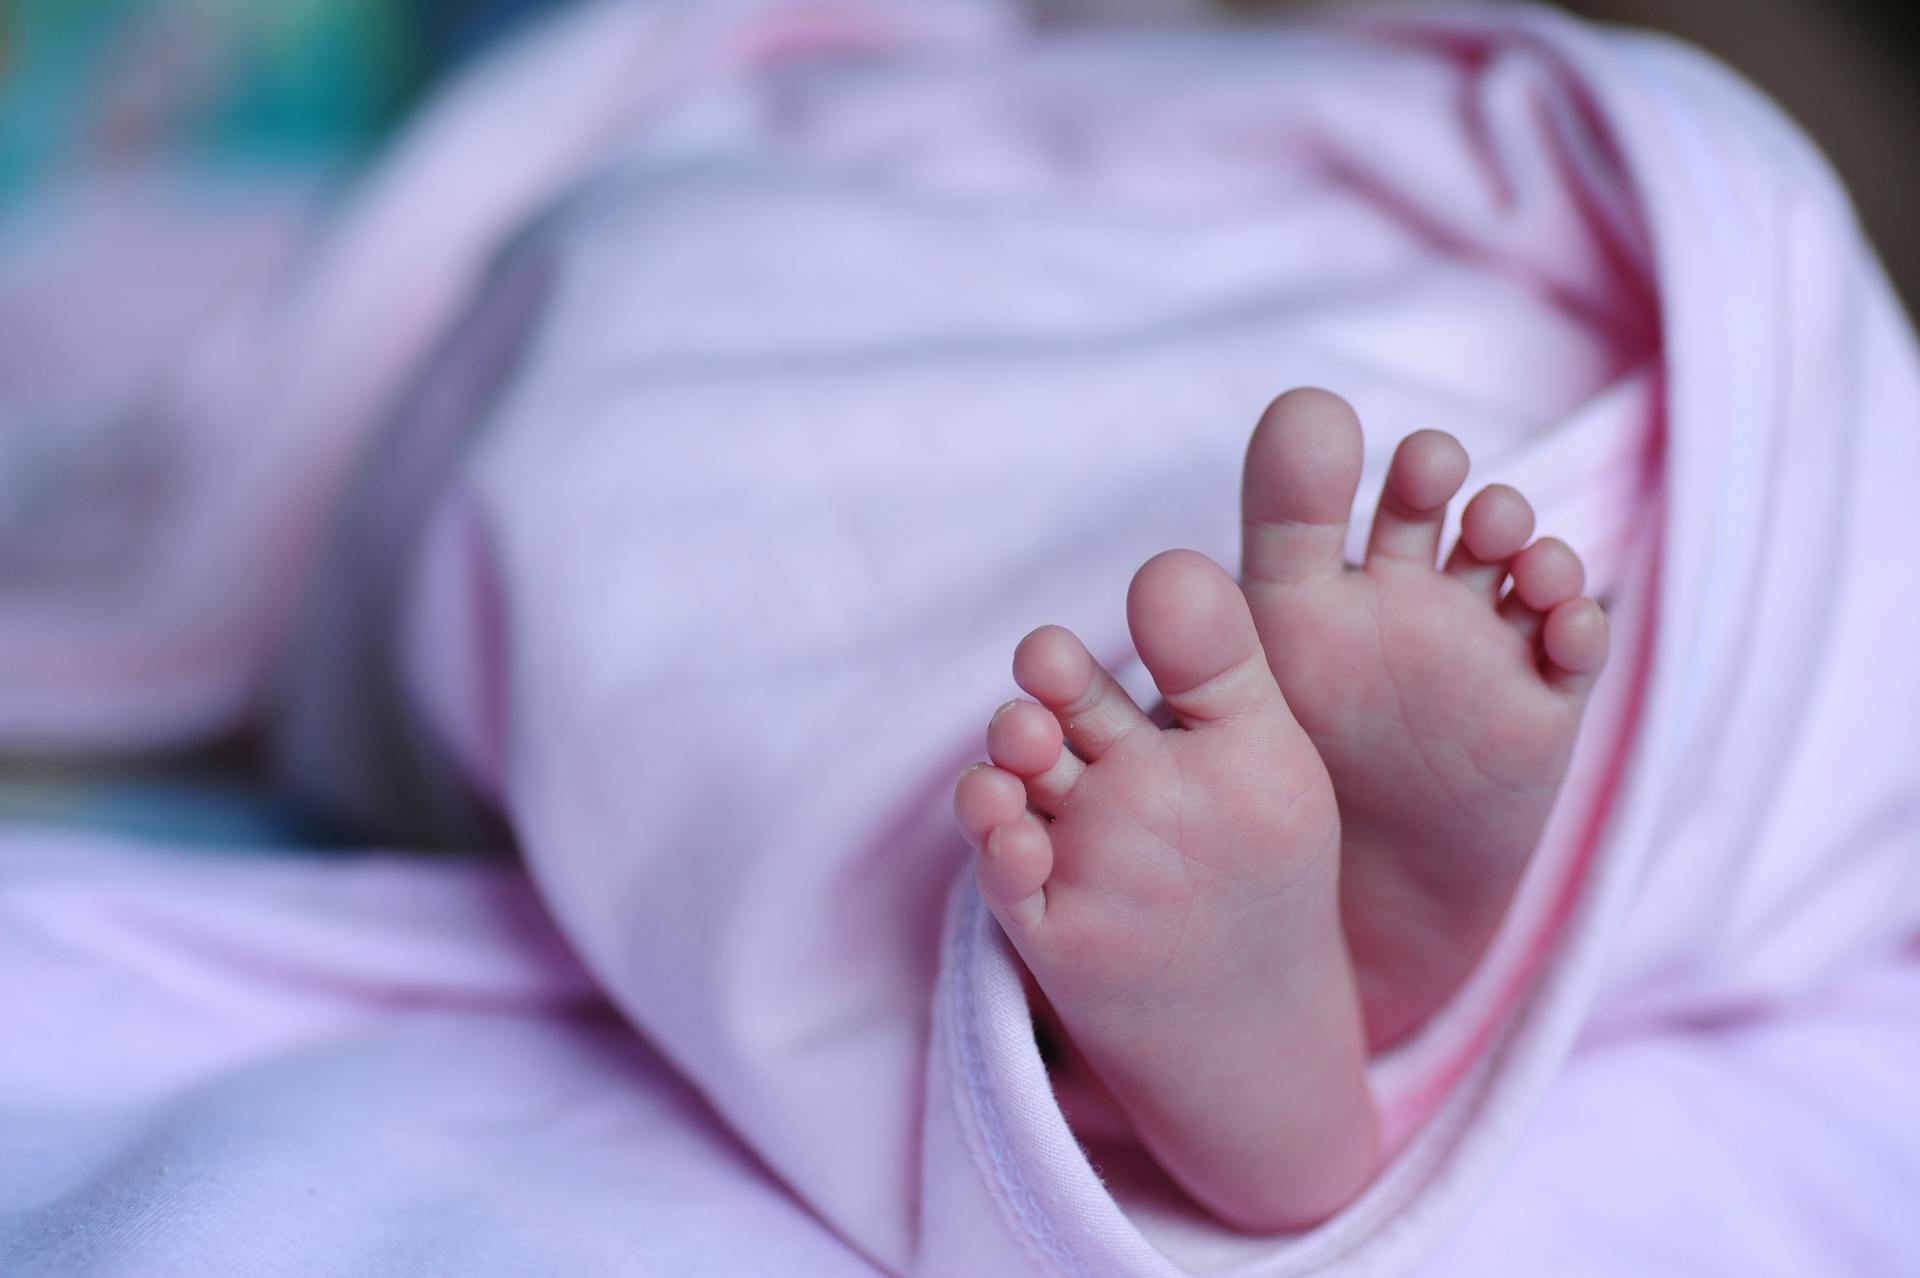 The feet of a newborn baby | Source: Pexels